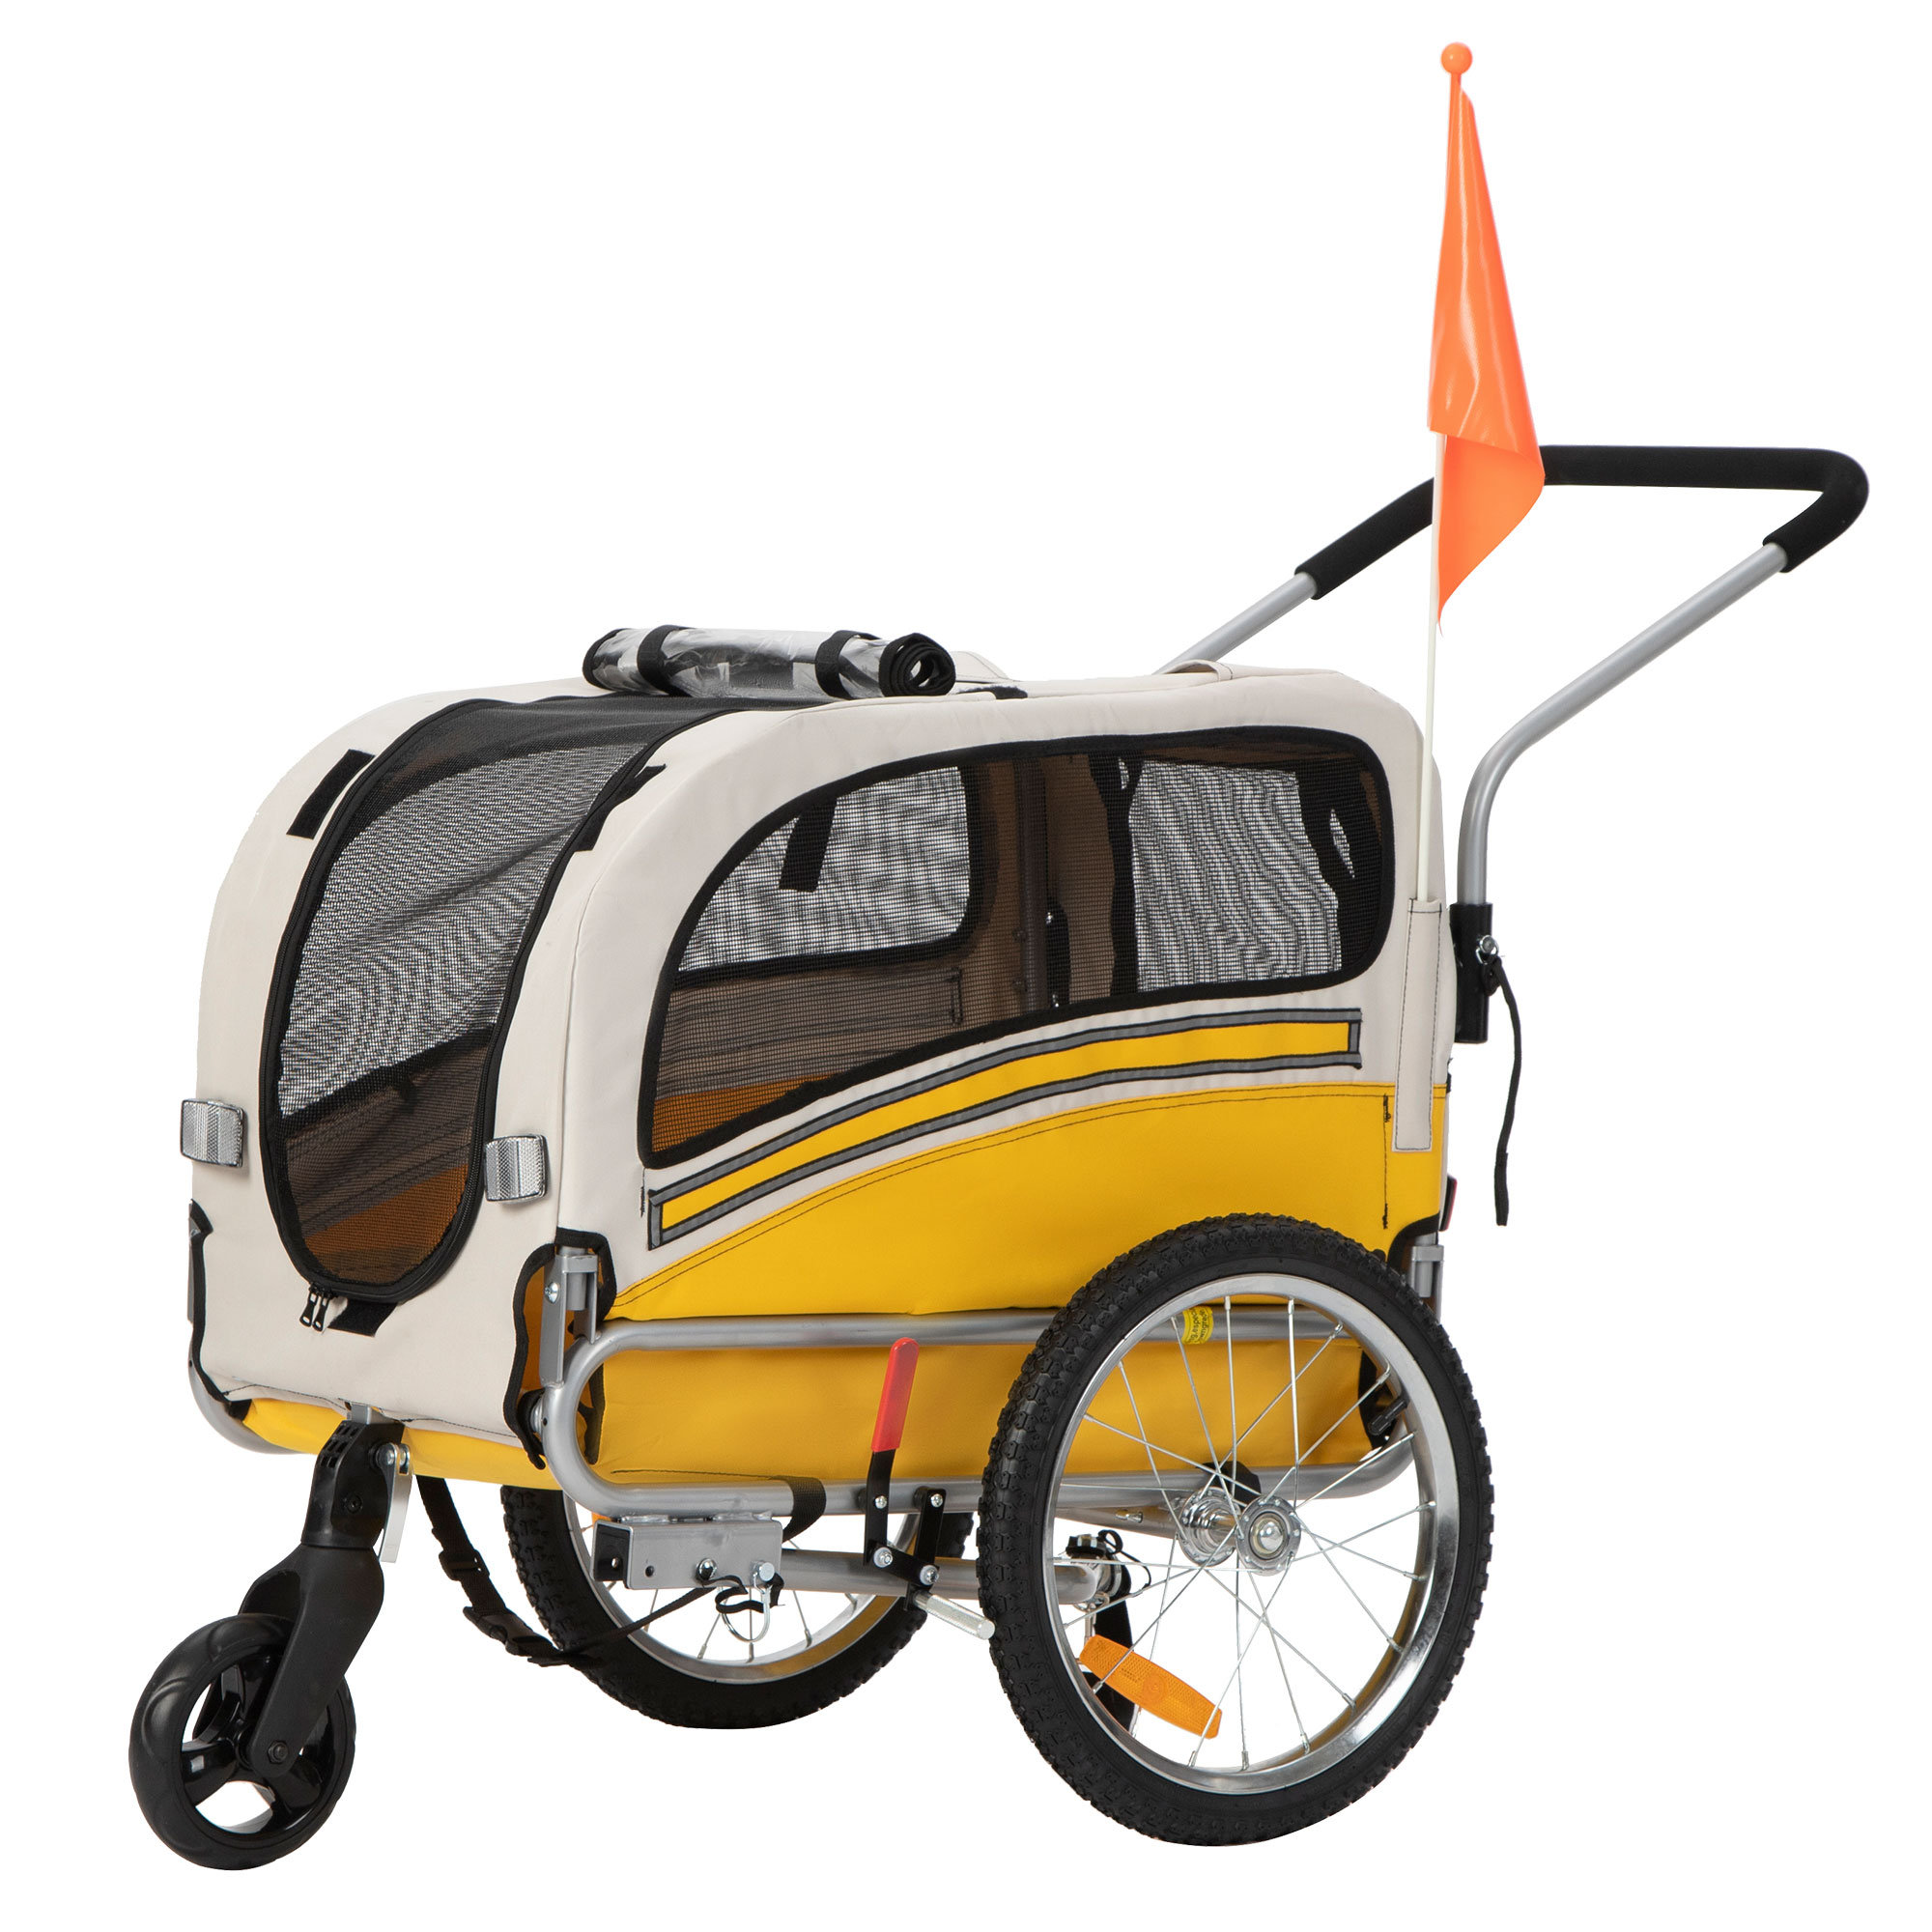 An Adjustable Bike Trailer for a Craft Booth : 5 Steps (with